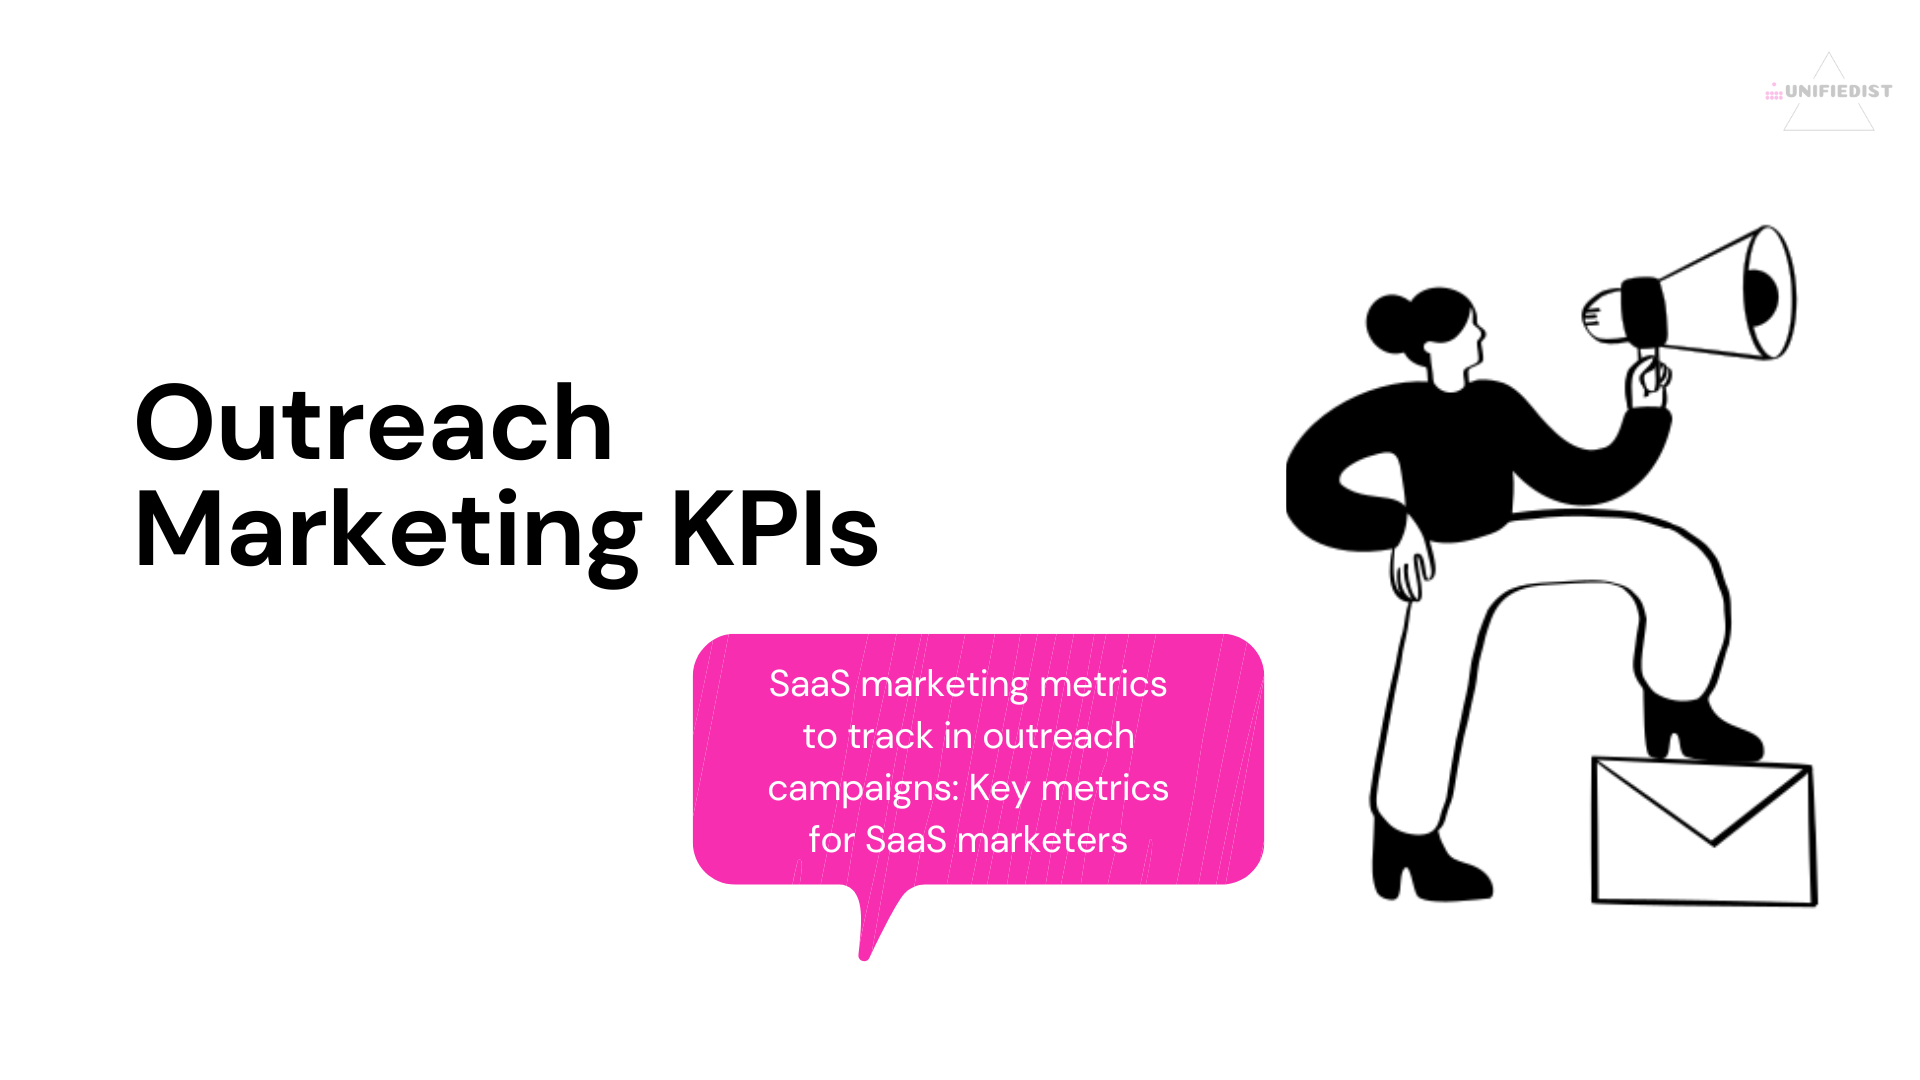 SaaS Marketing Metrics To Track In Outreach Campaigns: Key Metrics For SaaS Marketer